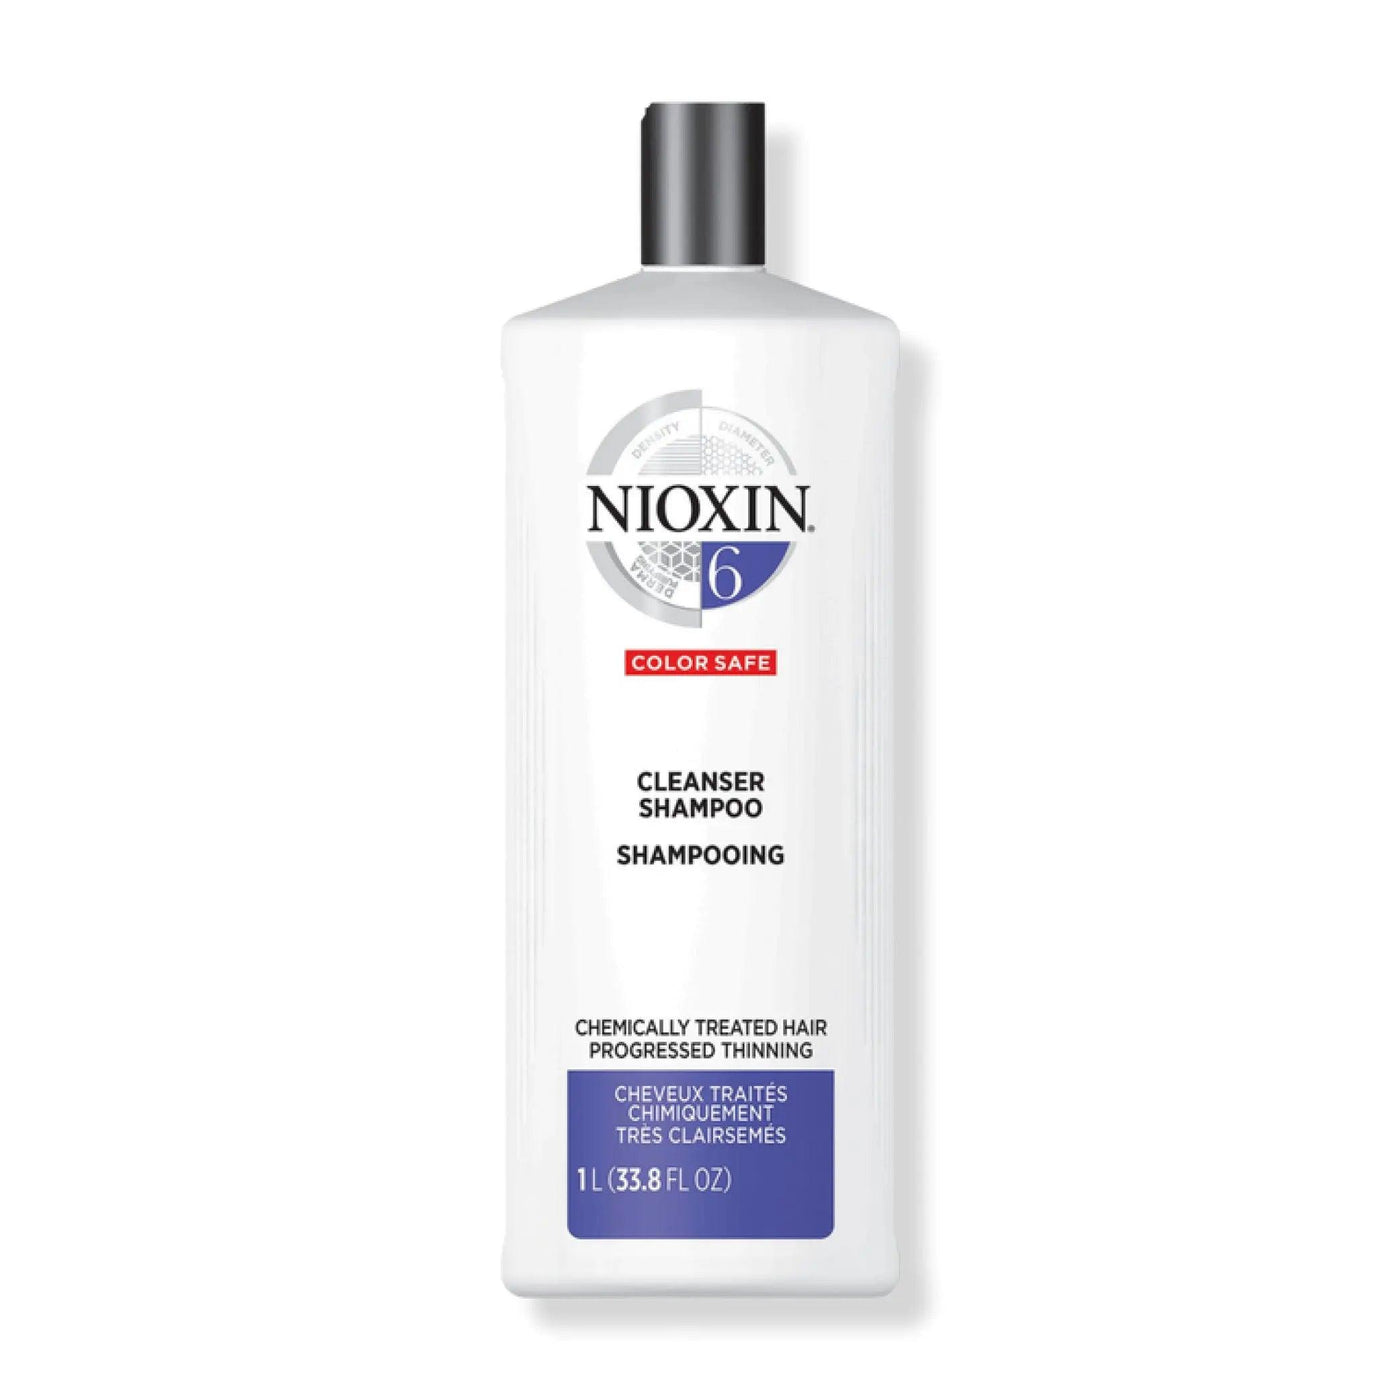 System 6 Cleanser Shampoo Nioxin Boutique Deauville